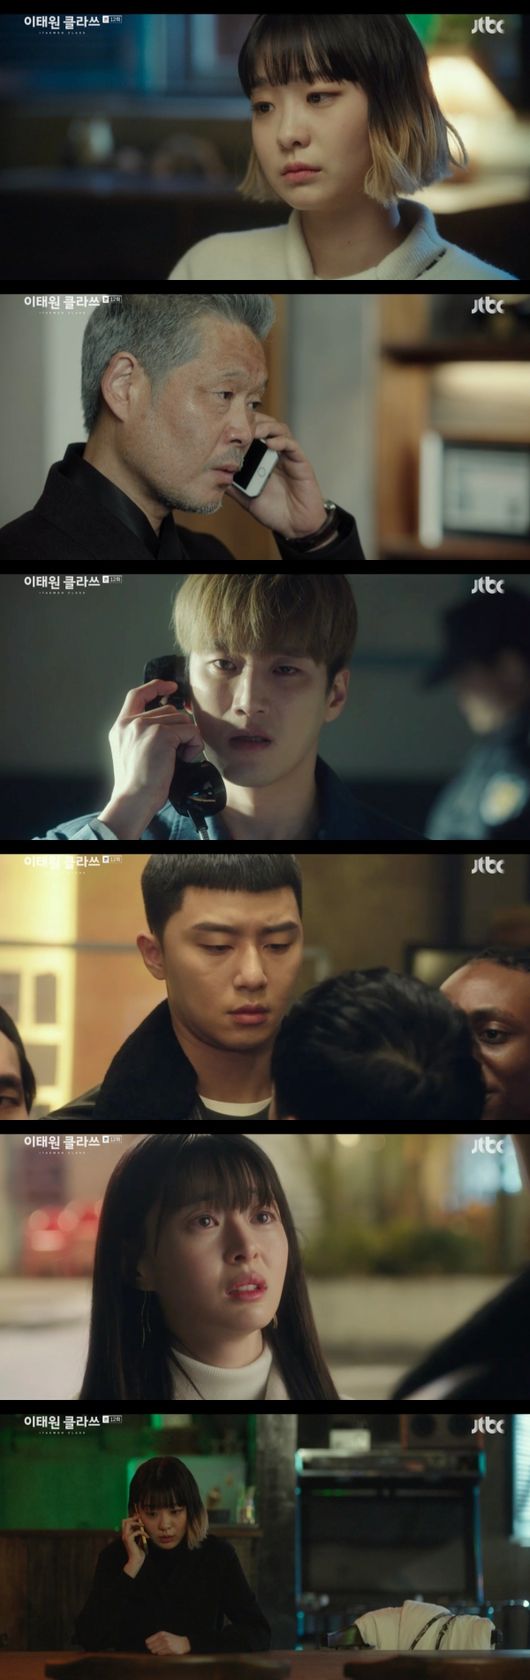 Itaewon Clath Park Seo-joon broke his pride and asked Kim Mi-kyung to invest, and Lee Ju-young went on a full-scale war with direct comments that he was a transgender.The scheme of the rich man was scratched at night, but it did not break down.In the JTBC gilt drama Itaewon Klath (director Kim Sung-yoon, playwright Gwangjin) broadcasted on the 7th, Park Seo-joon was portrayed as a crisis as 10 billion investments were turned into a wreck due to Jang Dae-hees scheme.Joe-yol Lee (Kim Dae-mi), who was rejected by Park for Confessions, drank soju alone and wiped away tears.At this point, Lee Ju-young returned to the store, and Ma Hyun-yi gave a warm comfort to Joe-yool Lee, who wanted to be alone.Joe-yool Lee asked him to take a vacation, as he suggested, and he was worried about him.I do the construction division, I just worked without a day off these days, Im going to make a change of mood, Joe-yool Lee said.Jang Dae-hee called SuA (Kwon Na-ra) and Jang Geun-soo (Kim Dong-hee) when Jangga stayed in second place in the MinorceFoa at night. So Jang Geun-soo said, It is a team-end employee.There is nothing I can do. At least I will not be unfair if I am moving. Jang Dae-hee called. It was The Fountainhead (Security).Jean said in tears, When my father abandoned me, I would have had no choice, and my father would have been sick.Then, The Fountainhead asked, Why do you do this to me? And Jang Dae-hee answered, Everyone is for Jangga.Lee Ho-jin (Idawit) hastily visited the Roy, and as Chungmyung Holdings, which has joined hands with Jangga, withdrew its investment, followers have been out of line.The night, which has not yet received the investment, has been hit hard.The franchise owners had a riot at the end of the night, among which SuA brought a pot with a message: Do the Anbundji () from Baro Jang Dae-hee.All this was his painting.Jang Dae-hee said that Jang Geun-soo had joined hands with Chung Myung Holdings from the beginning. Jang Dae-hee said, Who invests 5 billion won in a small store?It is as big as he does his best. Jang Geun-soo asked, Just to trample Roy. Jang Dae-hee said, To trample Roy? It was enough to move, but Chung Myung Holdings is hard to control.I needed to show it. This Jang Dae-hee is an old man with a pinch. Jang Geun-soo provoked Jang Dae-hee, saying, I know my father is great, but I do not know. Did you care so much about someone who collapses like this?SuA stopped the revenge of Roy, who said, You cant just stop, you keep hurting and hurting like this, youre errands, and I dont know how I felt when I brought that pot.How long do I have to do this to you?You said, Our relationship, its my decision. Revenge for the house, hate it, come to me.Just in time, Joe-yool Lee called, who apologized to Joe-yool Lee, saying, I am the representative. Dont carry everything.You trust me, too. I dont fall this far. This is nothing, he said.The real big thing is when my father was cut off from his job for 20 years, when his father was hit and run and his death was covered up.I could stand up and promise revenge. Before that, I can not have my happiness. I will break down the house, I can not put it down or stop it before that. This was also an indirect rejection of SuAs Confessions, which, in turn, SuA sat down and fizzed, but Roy said he was sorry.Kim Soon-rye (Kim Mi-kyung) visited Jang Dae-hee, who said, Do you want to get old and bother the child like that? and gave Jang Dae-hee a pinjam.I was blessed, I hope I dont touch it anymore. But Jang Dae-hee said, At first, I was light-hearted to fix my habits.But now it is the last reason of this life to kneel down once. Joe-yool Lee closed his vacation and started working again. Roy asked Joe-yool Lee if he was feeling better.Joe-yool Lee said, I like it so crazy. I like it so much that I did not go to college and work at night.If you dont want to be rewarded, dont tell me to get it straight, if this is a reason to get fired, Ill take it.I cant imagine a single night without you, he said.Kim Soon-rye visited Danbam as an investor, but Park refused to invest in Kim Soon-rye, saying, I dont want to make a deal about Tony.Kim Soon-rye also said, I have no money, I have no ability, I have a big dream. I can clean my family because I have to suffer.But Roy changed his mind when he saw MinorceFoa and the single-night family trying to invest.Park also found out that Joe-yool Lee had visited Kim Soon-rye, who went to the Jeju Island villa.Roy bends his pride and asks Kim Soon-rye to invest, and Kim Soon-rye says: If you invest, its not just Tony.I liked the sight of food, shops, and streets. I do not like to waste money. What is your goal? Park said, It is the first in our country.Kim Soon-rye laughed and said, I can not say who can not. Prove it by action. I promise to invest if I win the cooking show.Joe-yool Lee took over the phone, who told Joe-yool Lee, Im so sorry and thank you. Joe-yool Lee said, OK, I love you.Good night, I dream, he said, and once again he made a stone fastball Confessions.The final day of the MinorceFoa was bright. Jang Geun-soo reported to the media that he had been operating on the transgender surgery.To win, I said, This is the way of the house.Shocked, the maroon fled, wandering the station, and said to Park, who found him, Im sorry. I didnt run. My legs are loose. Ill be alert and ready for Baro.I thought it was going to be time. And I get investment when I win. No problem. I can do well. Roy told Marhyun.You are the bravest and most beautiful woman whoever says. Then Park said, You can run away. No. I have done nothing wrong.I do not have to convince others that you are you, said Ma Hyun, who tried hard to catch up with her, poured tears into her.Joe-yool Lee called Ma Hyun-yi and read a poem about a message of comfort.Im a transgender, and Im going to win today, said Ma Hyun-i, grabbing the microphone.Itaewon Klath captures broadcast screen